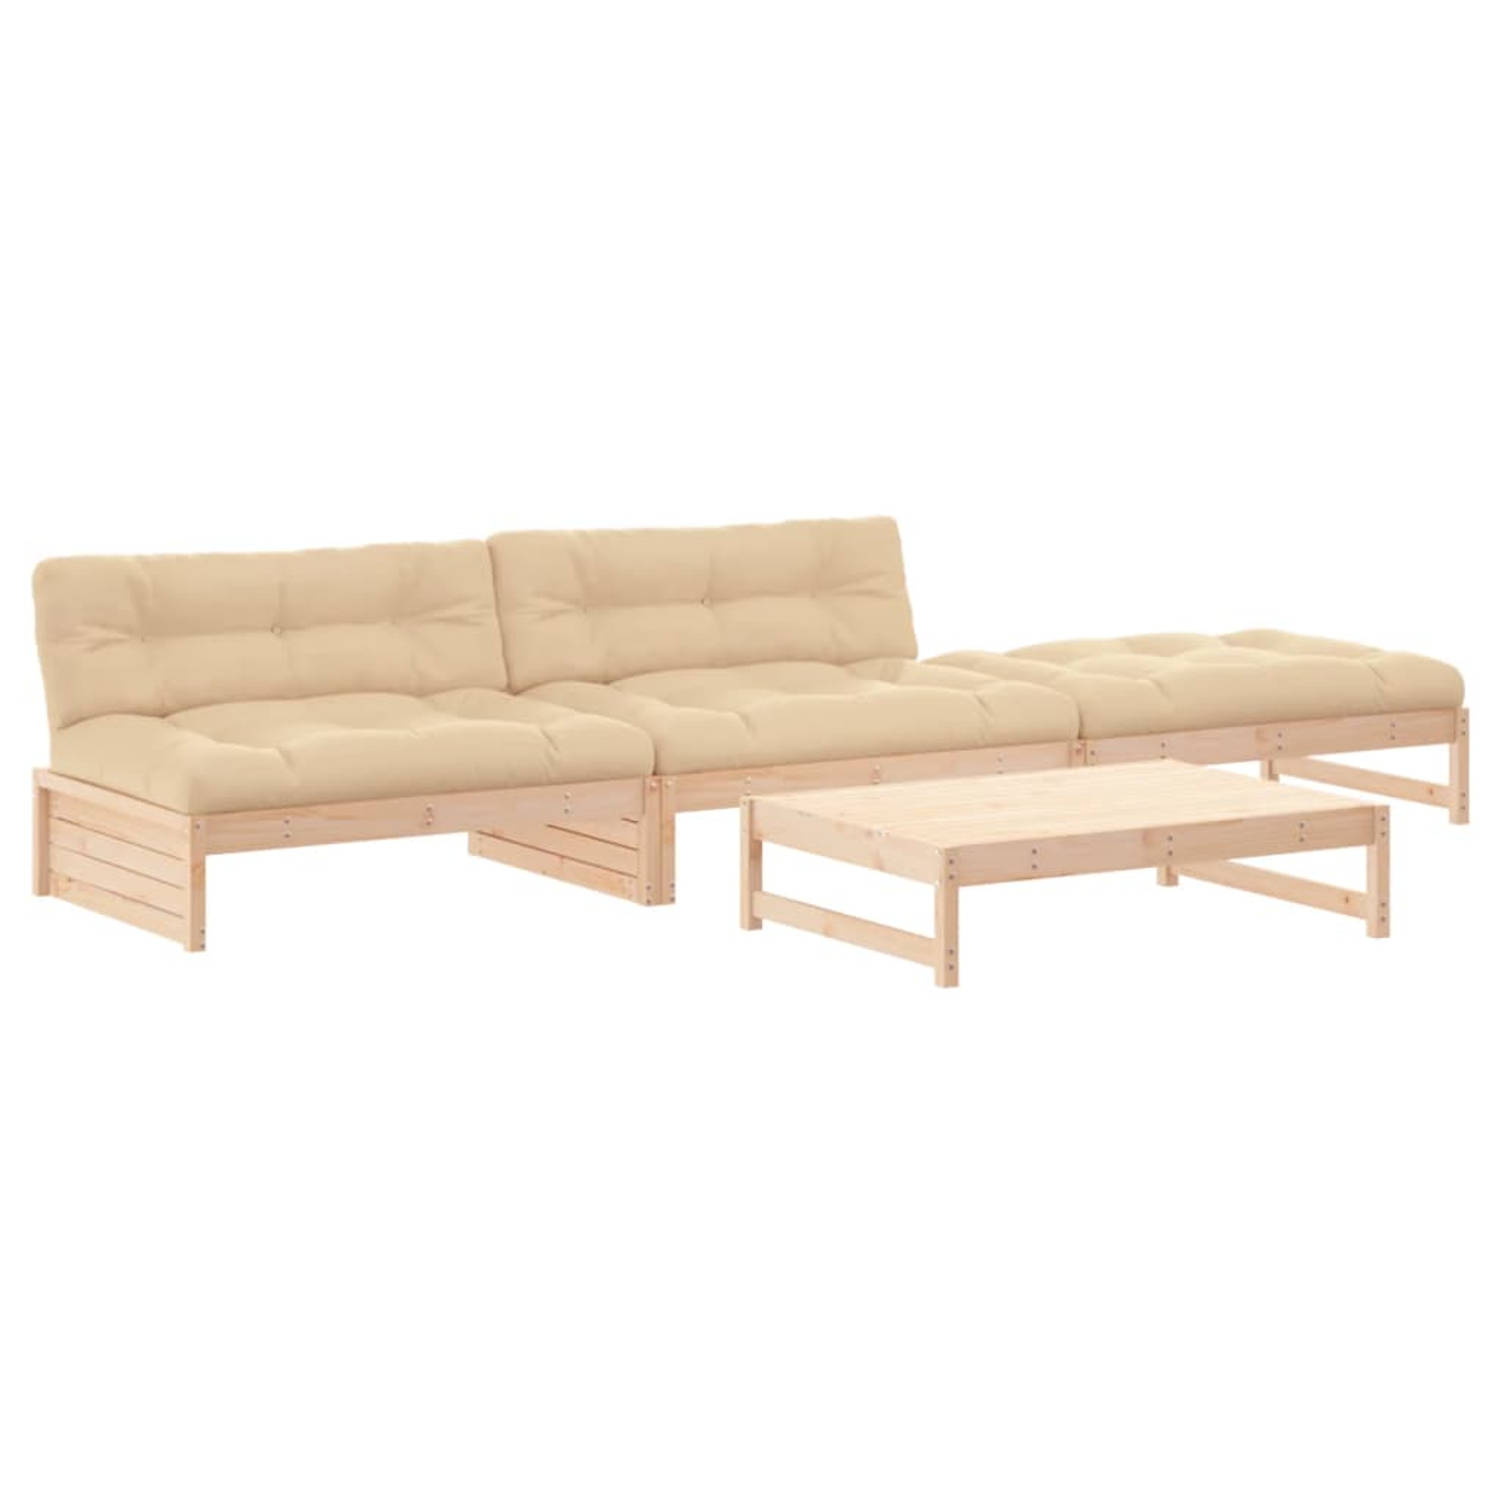 The Living Store Loungeset Massief Grenenhout - Tuin - 120x95x69 cm - Modulair